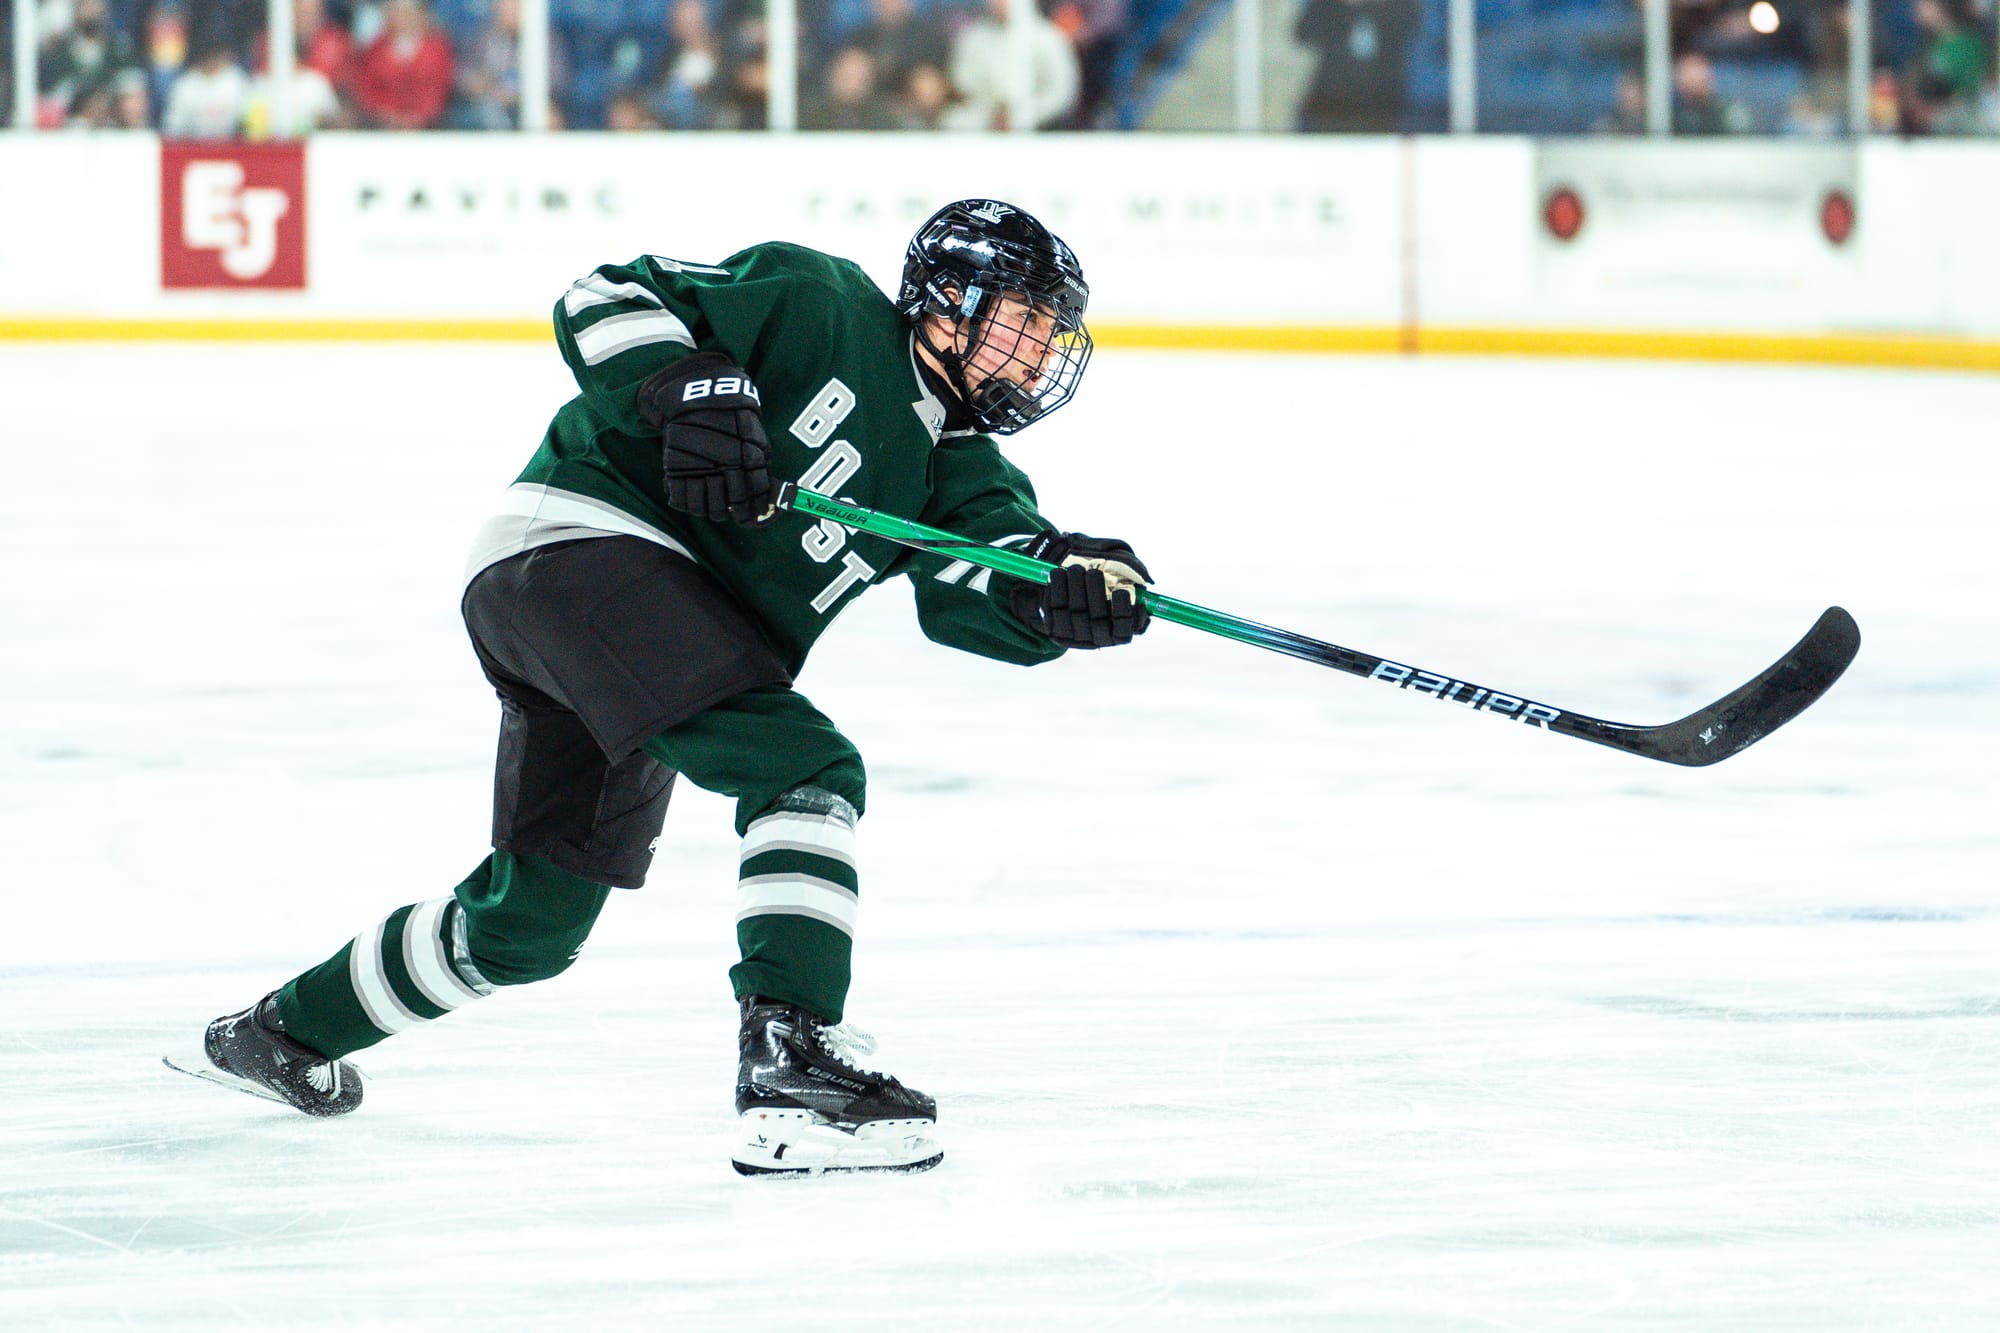 Alina Müller, wearing her green home uniform, takes a shot during Boston's game against New York. 